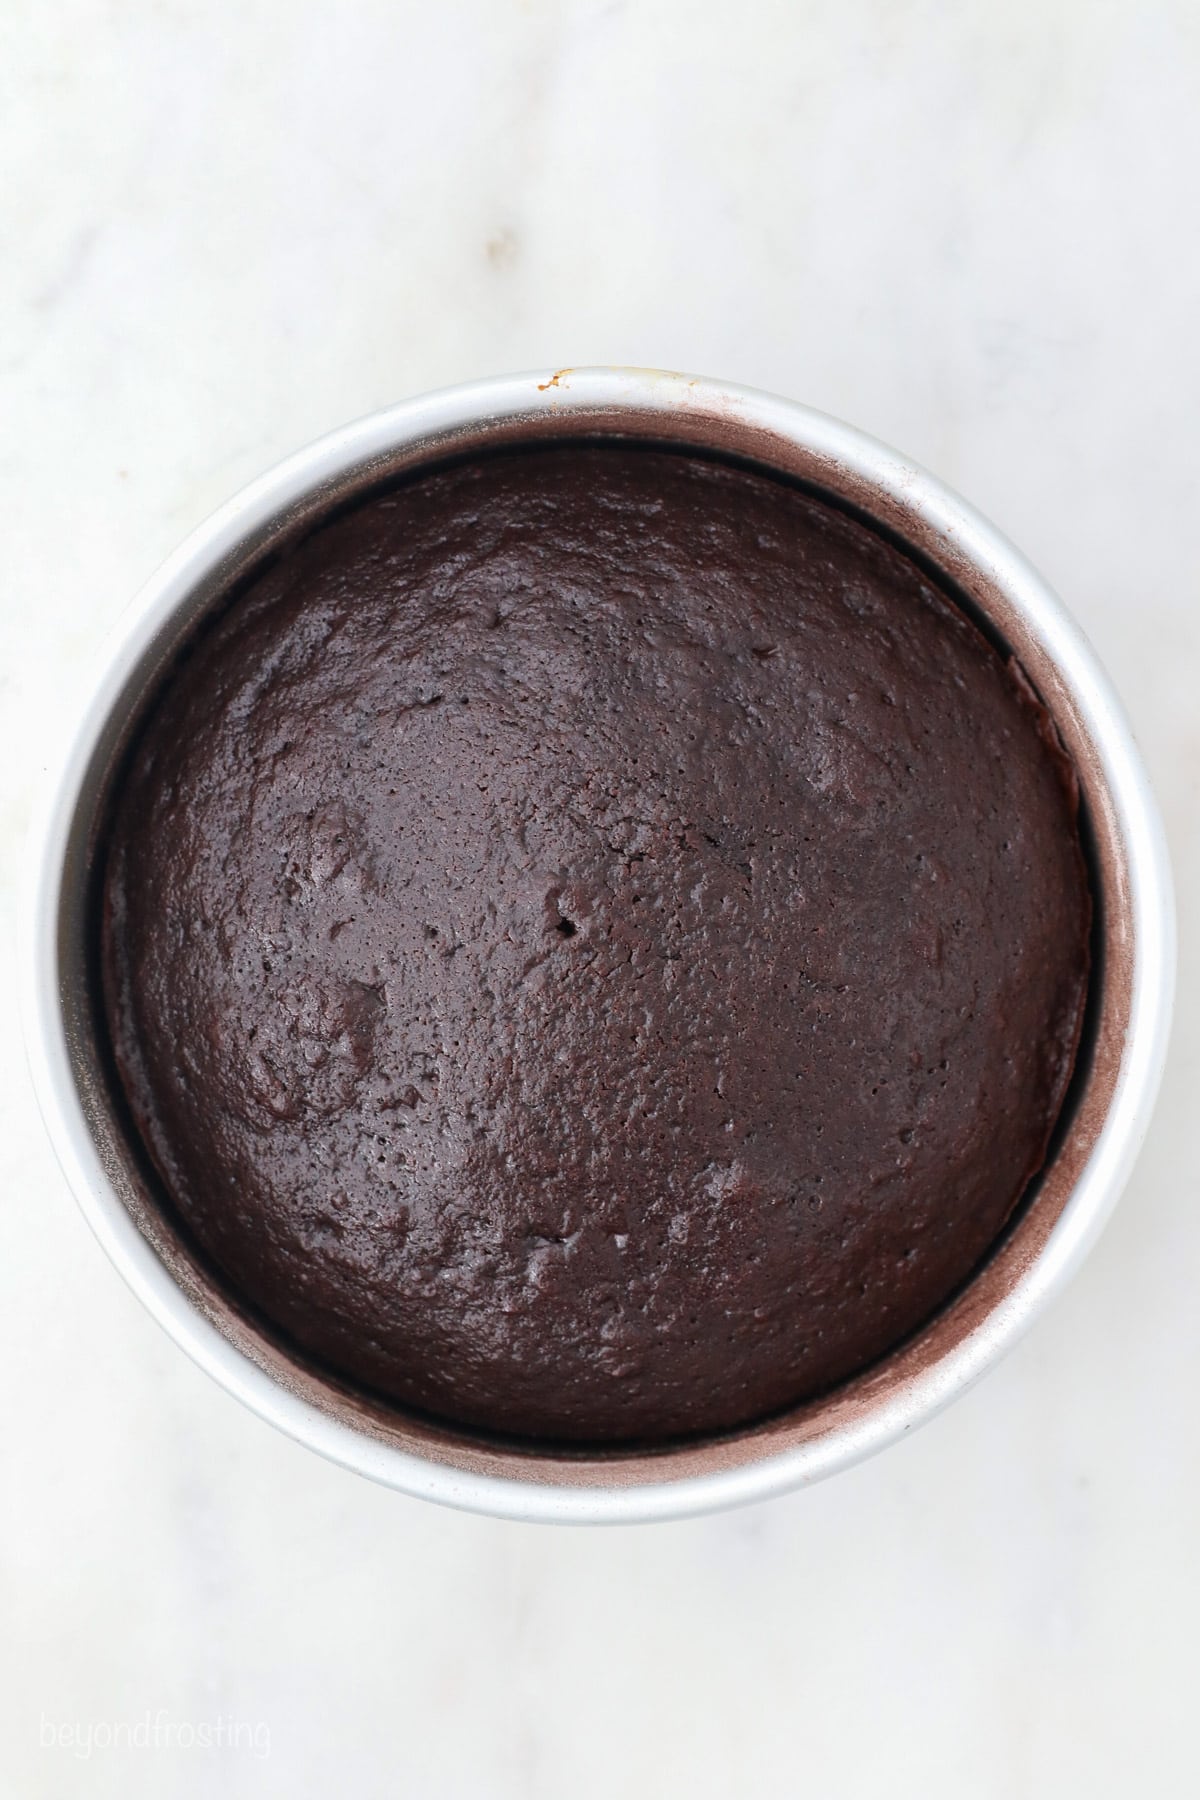 Overhead view of baked chocolate cake in a round metal cake pan.